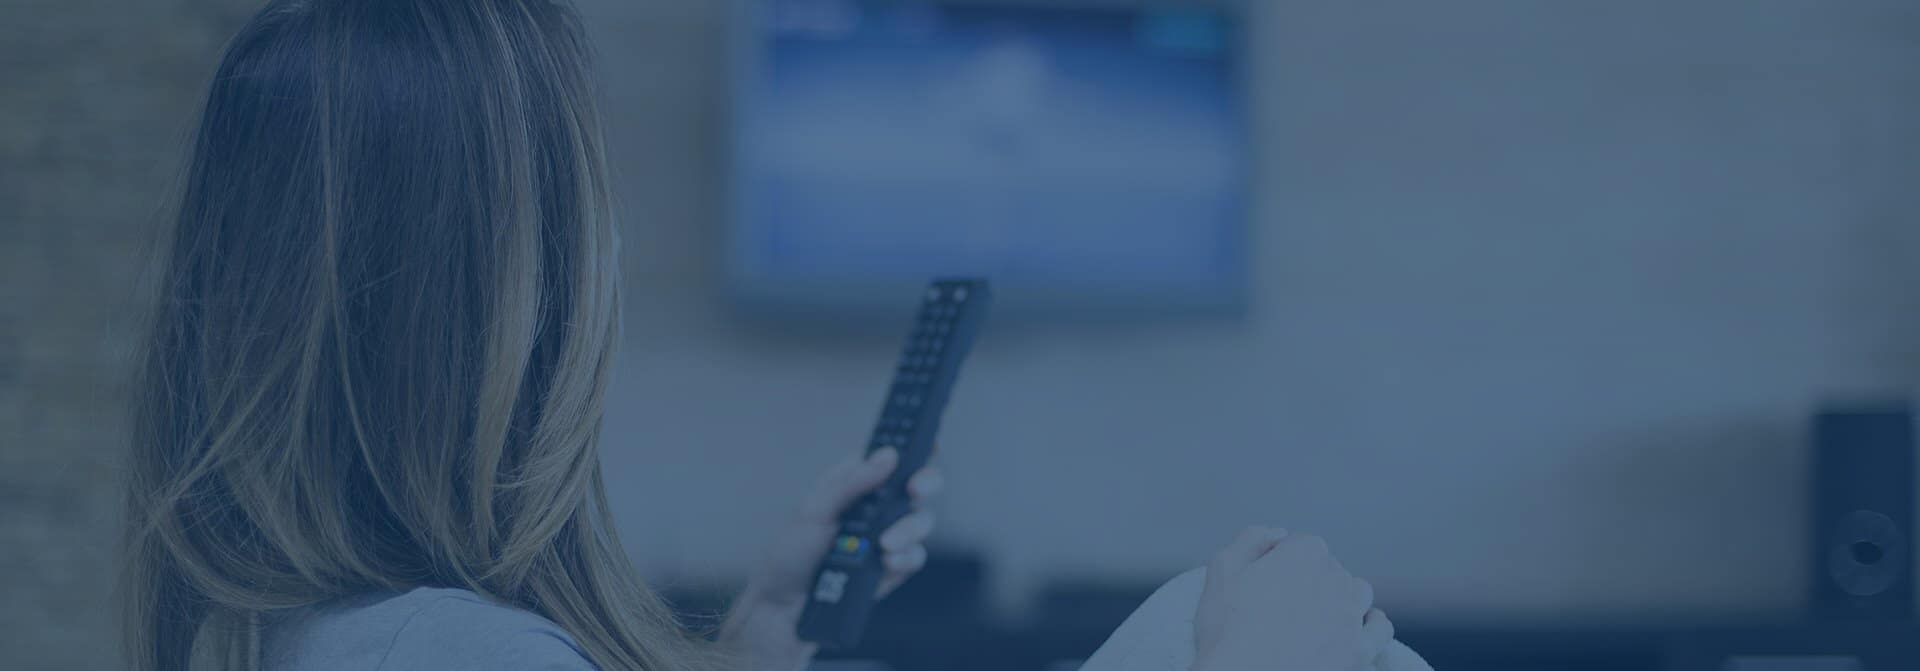 woman holding a tv remote